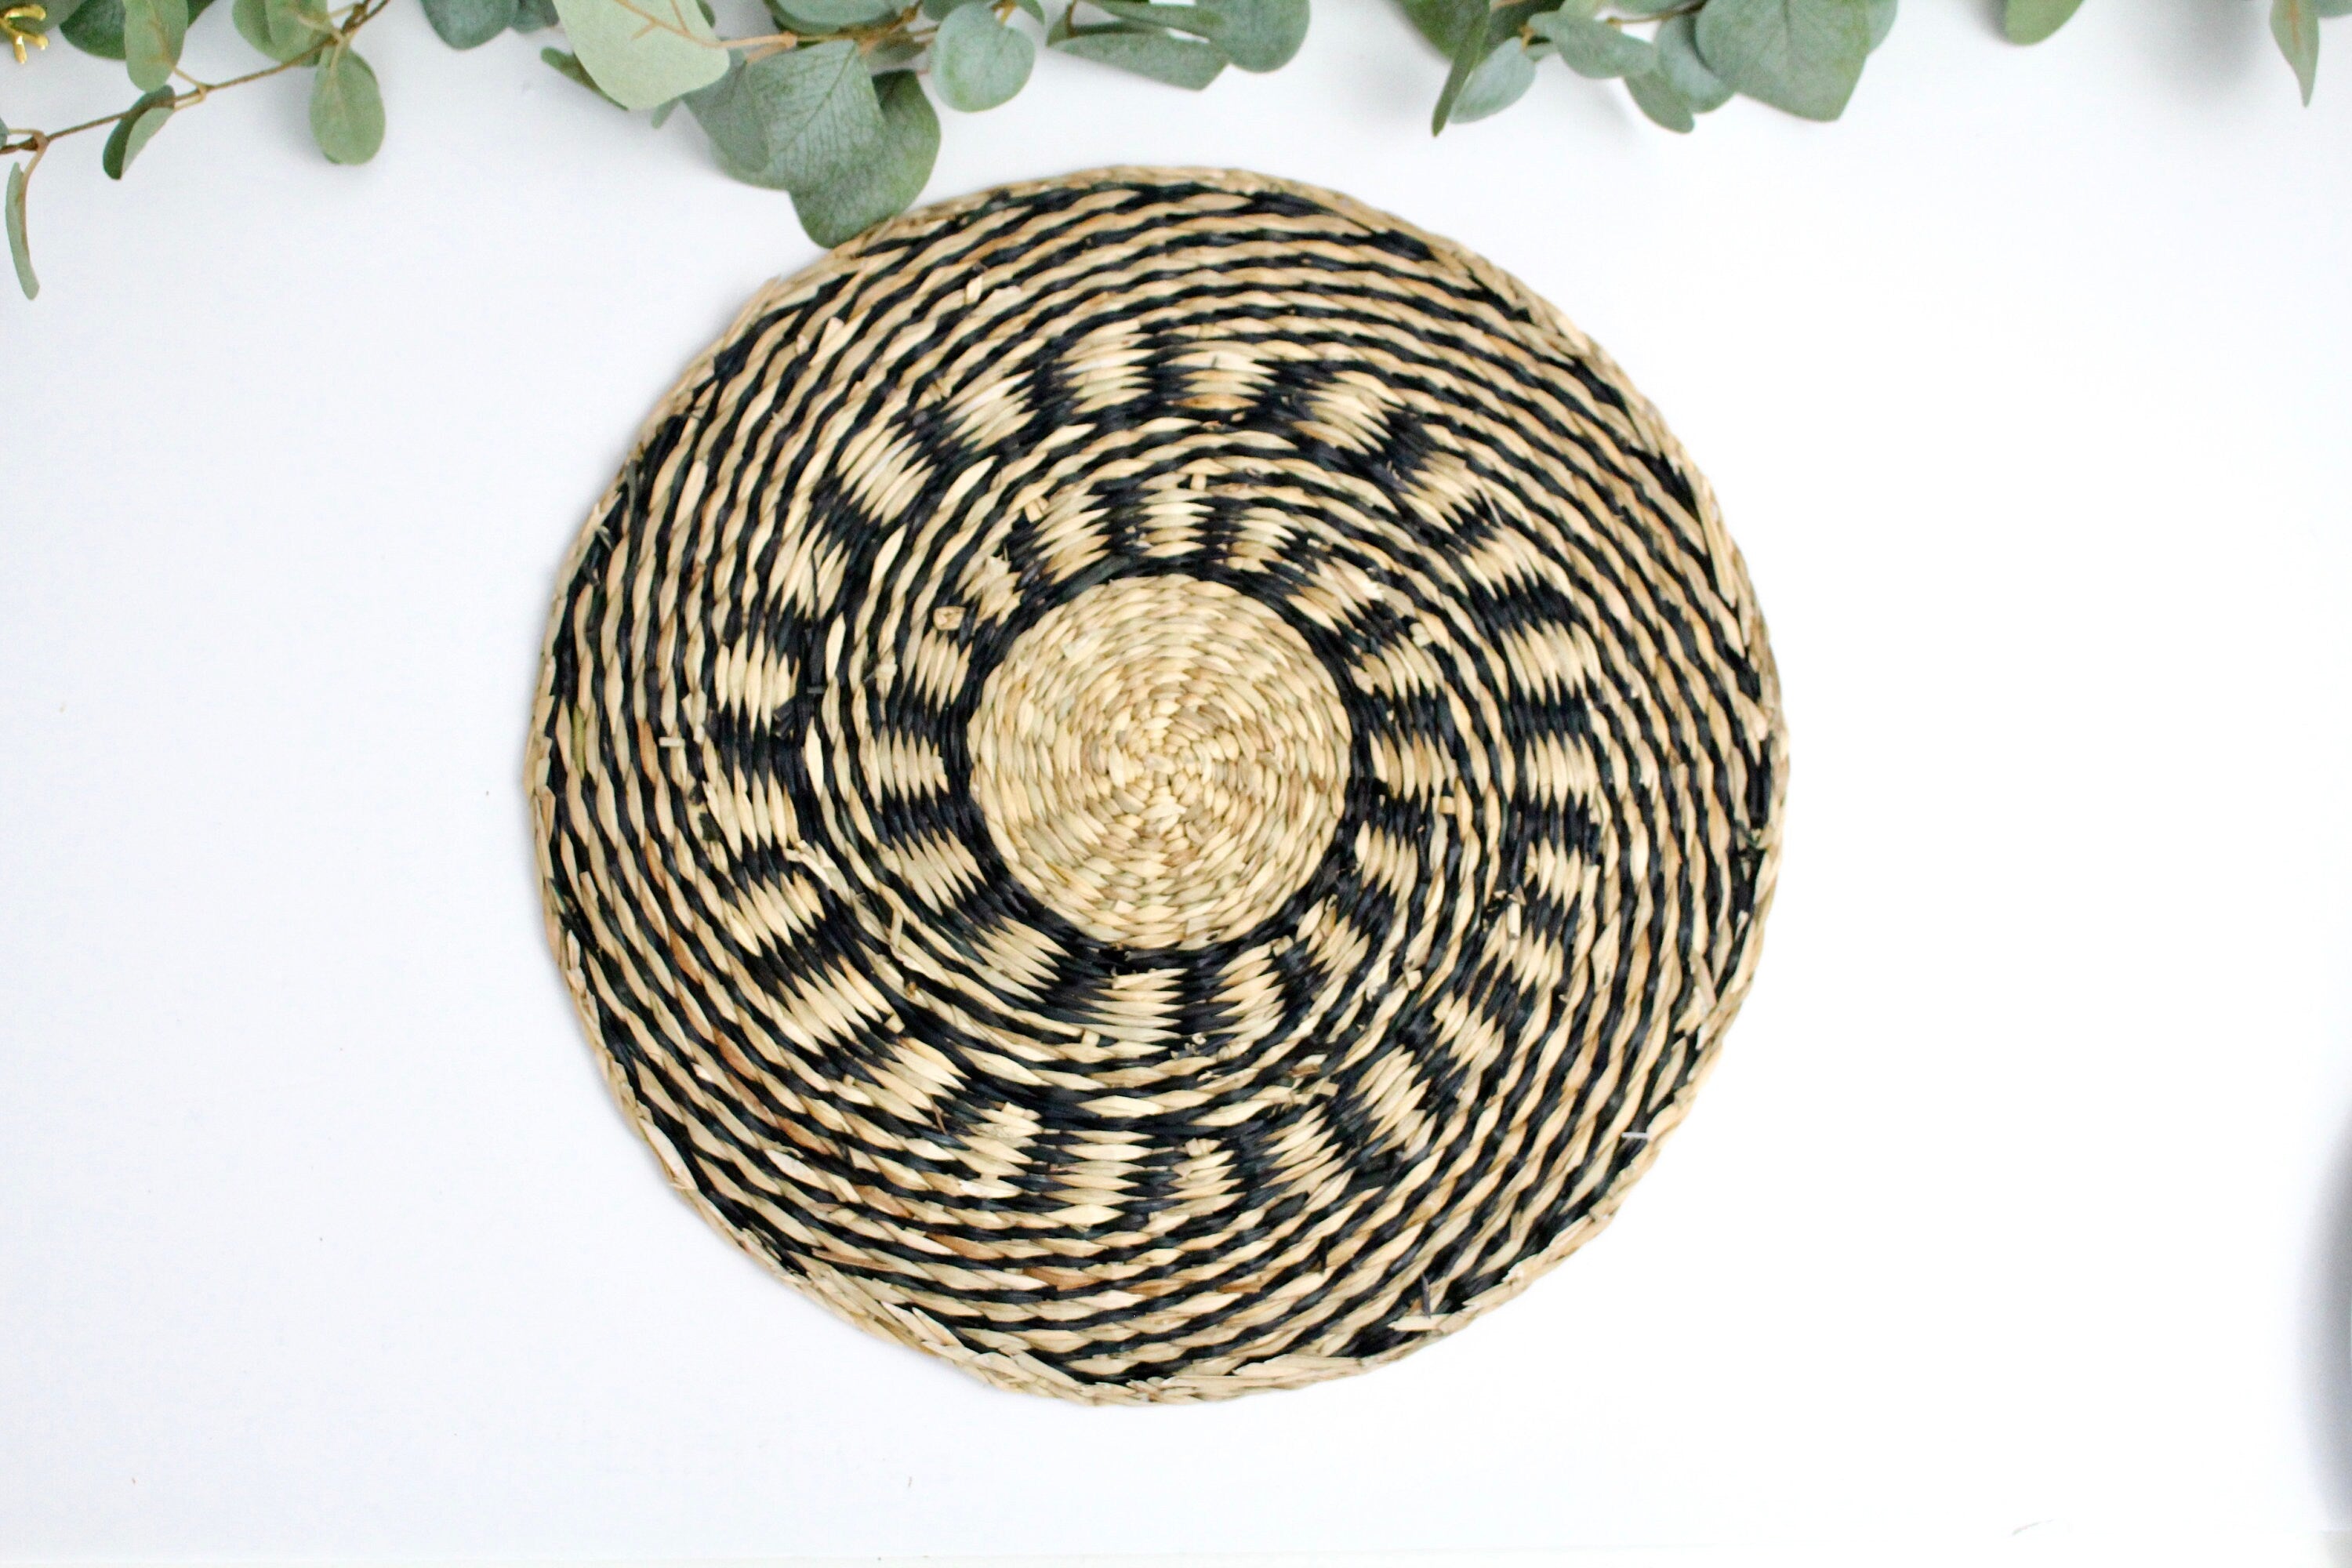 Black and Beige Swirl Woven Placemat CLEARANCE SALE